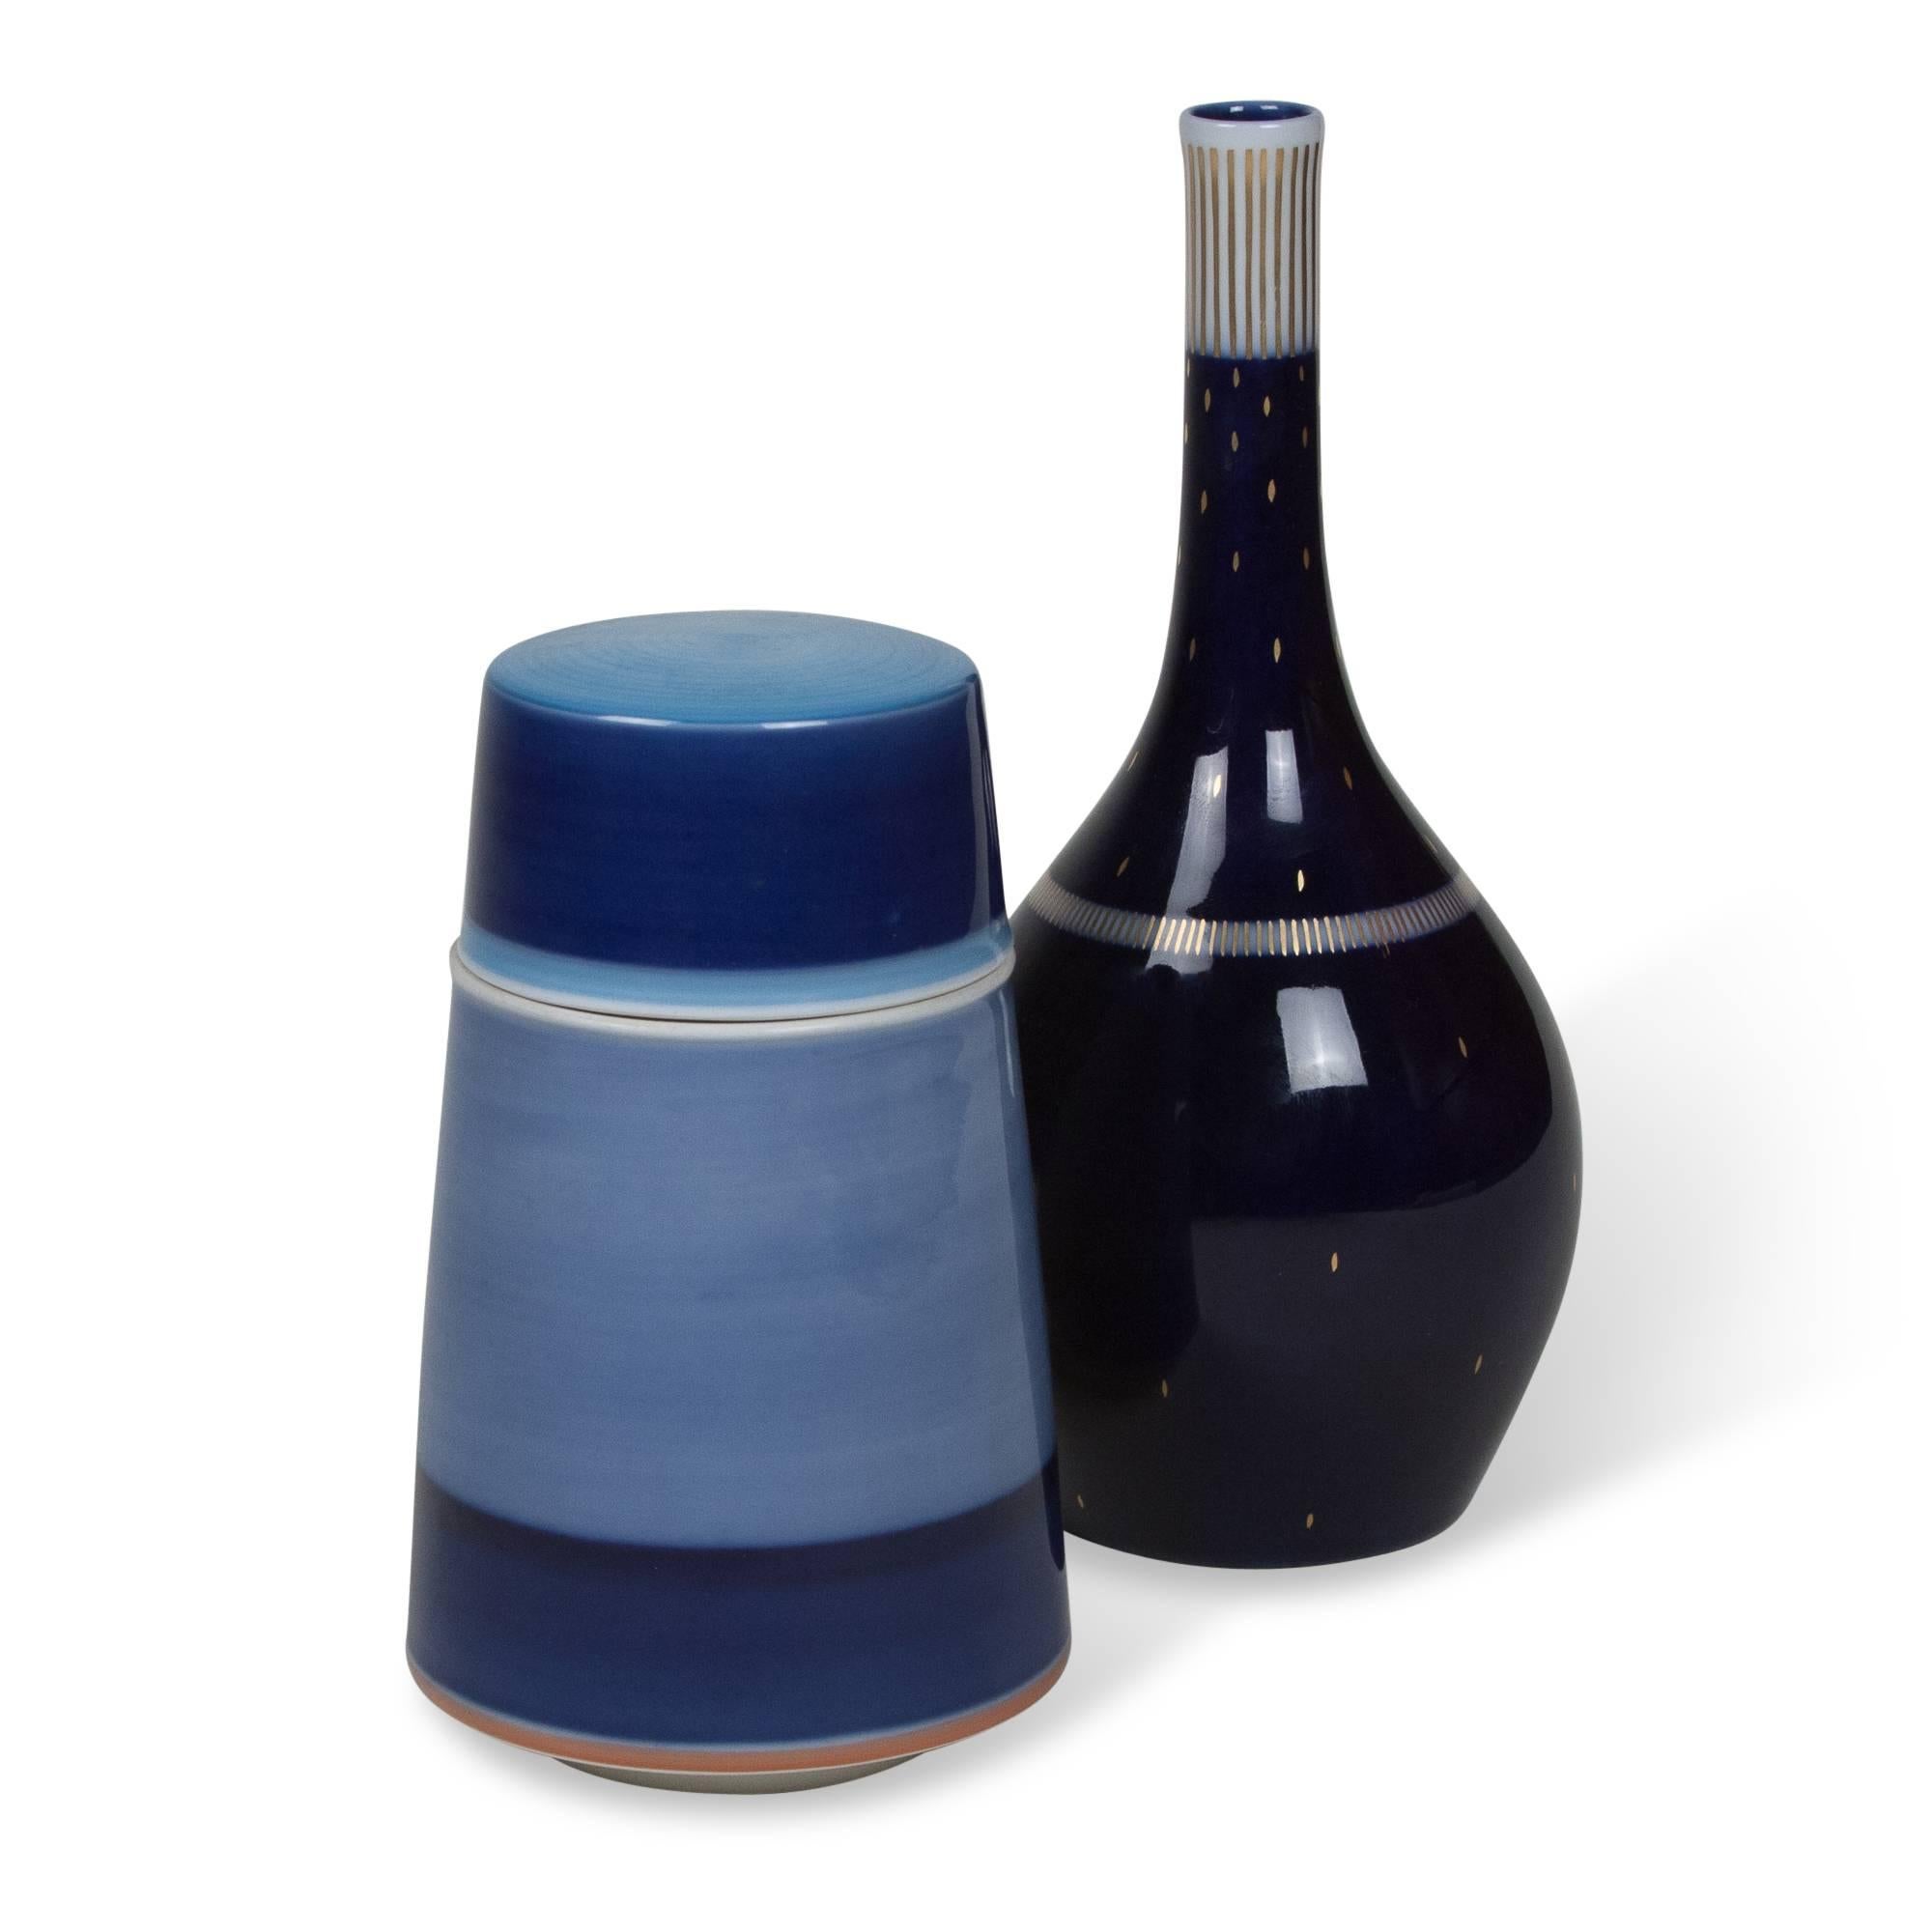 Two porcelain pieces:
On left: Cobalt blue and blue porcelain lidded circular container, with banding, by KPM, German 1950s. Signed. Measures: Height 5 3/4 in, diameter 3 1/2 in.
On right: Cobalt blue glazed porcelain bottle, with gold decoration